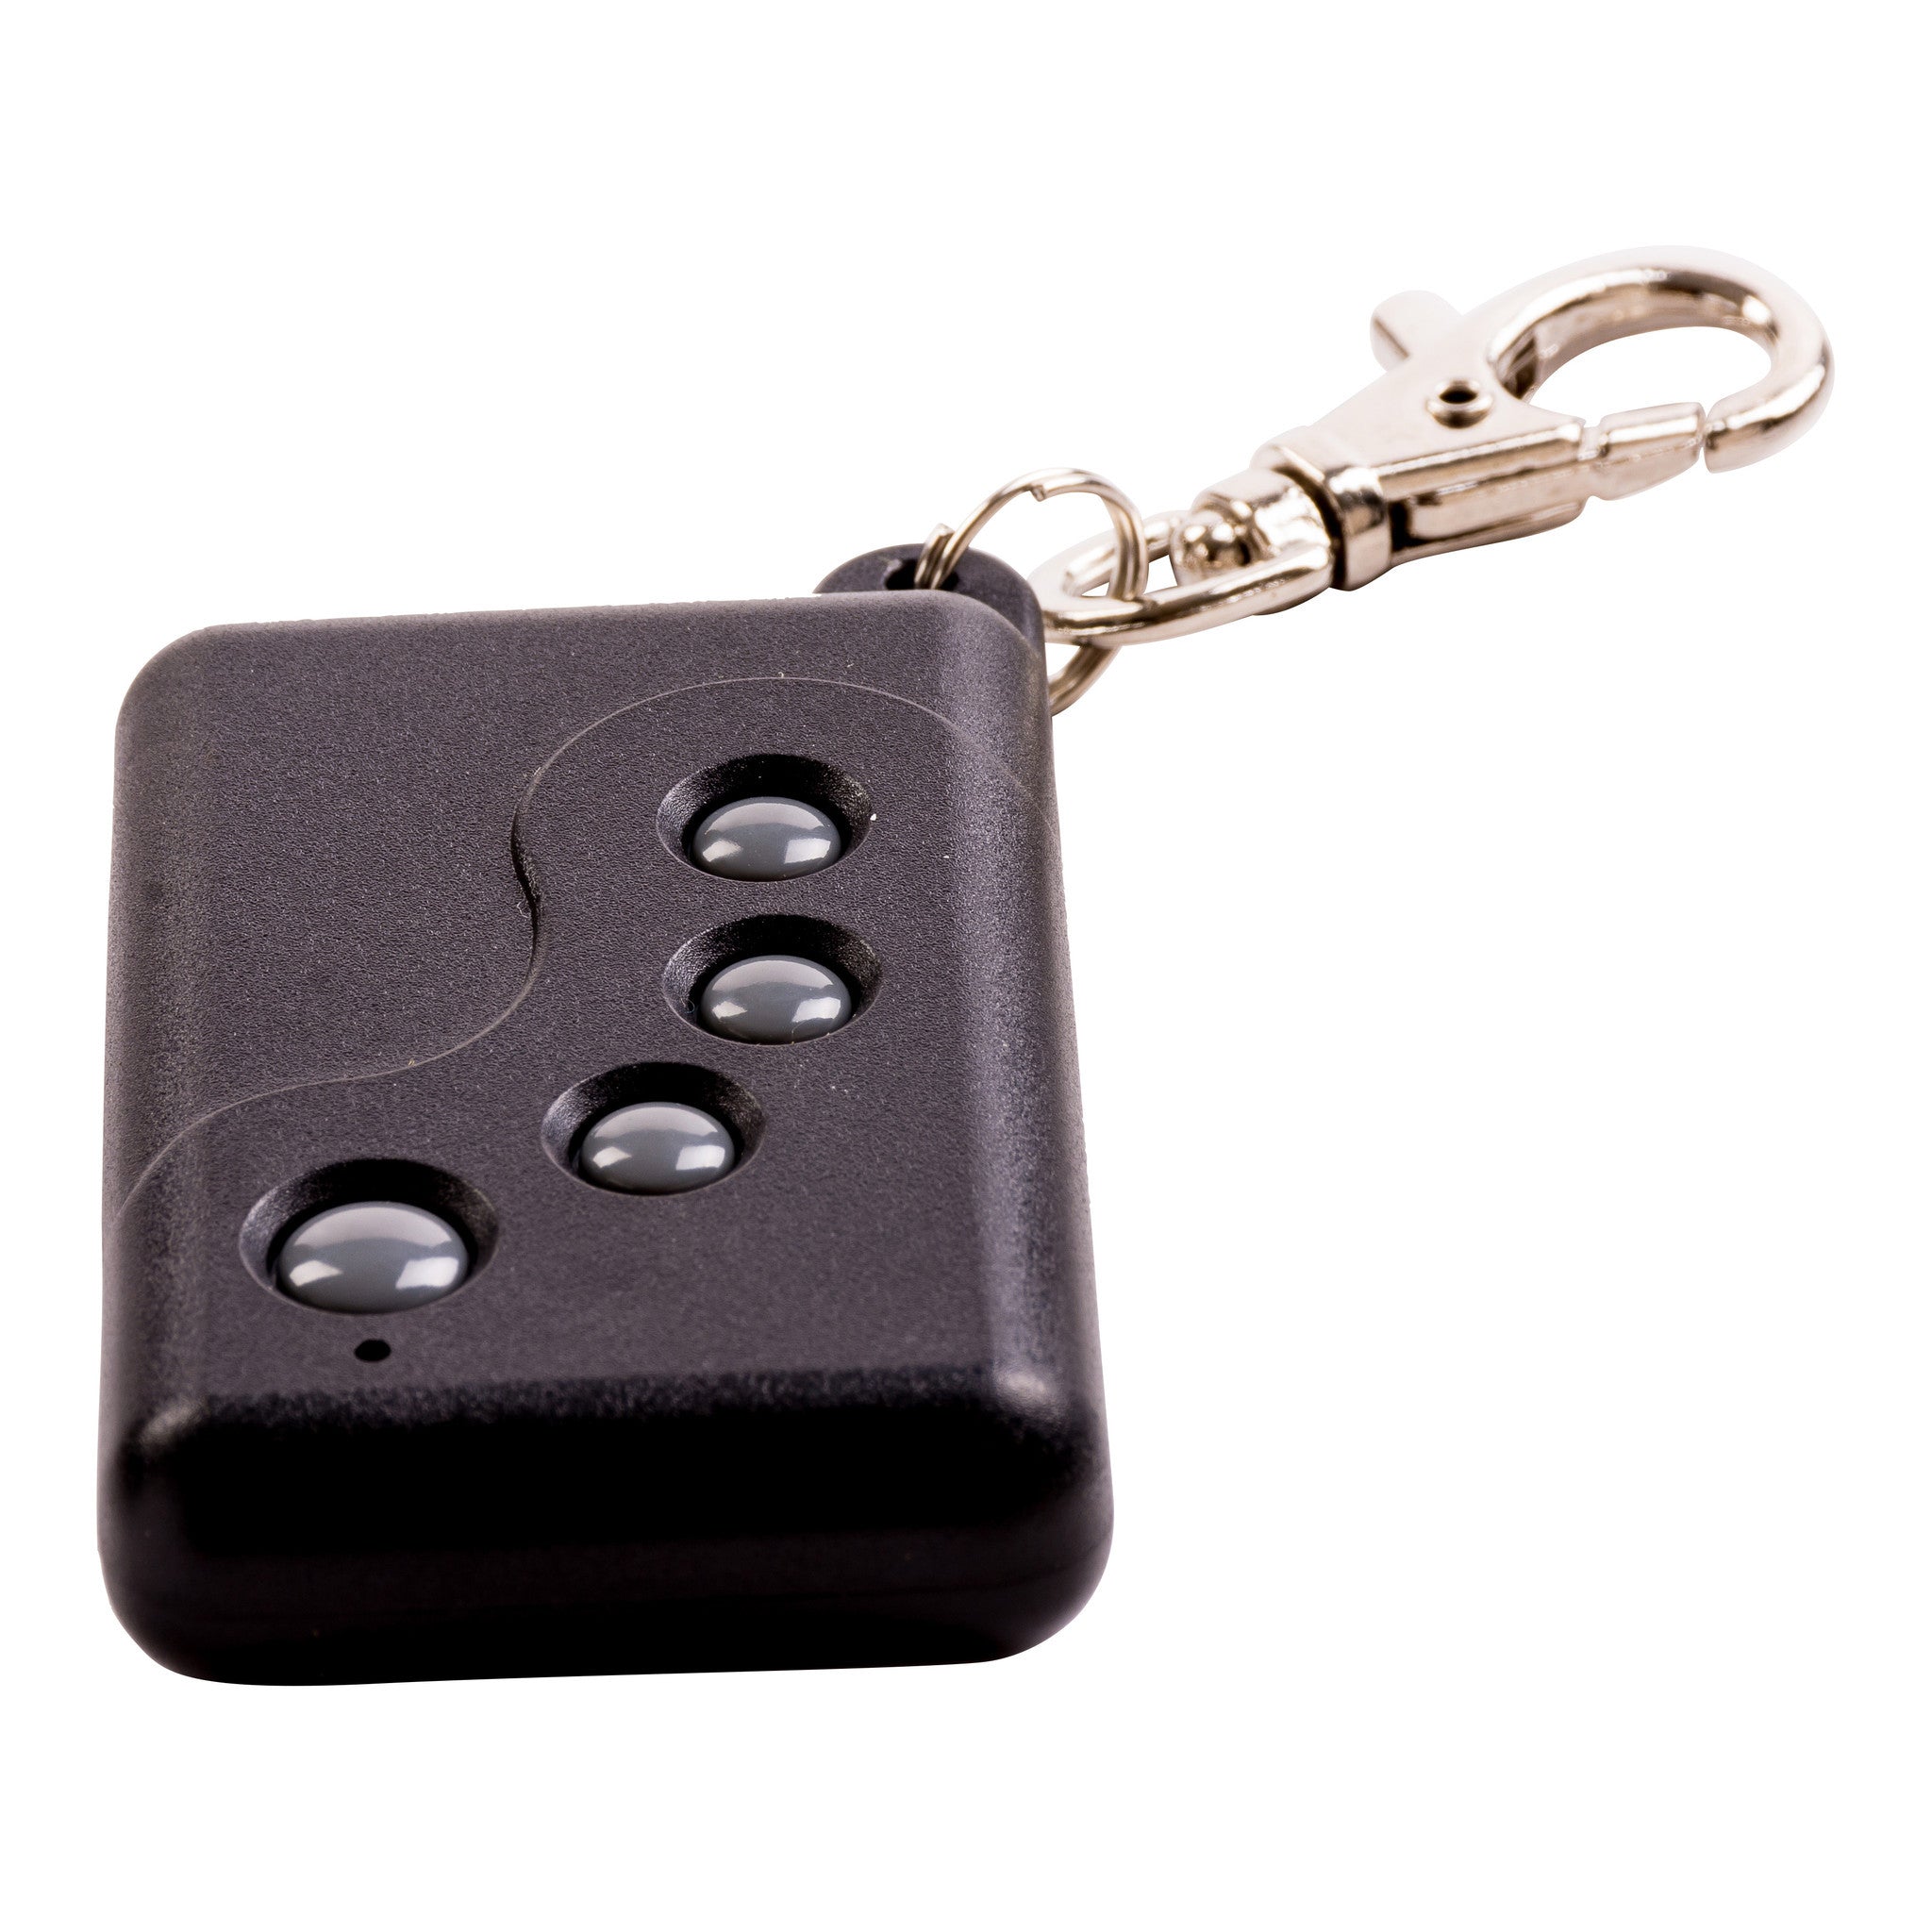 Vierkanaal Remote Control FOB - RC1 Product Image